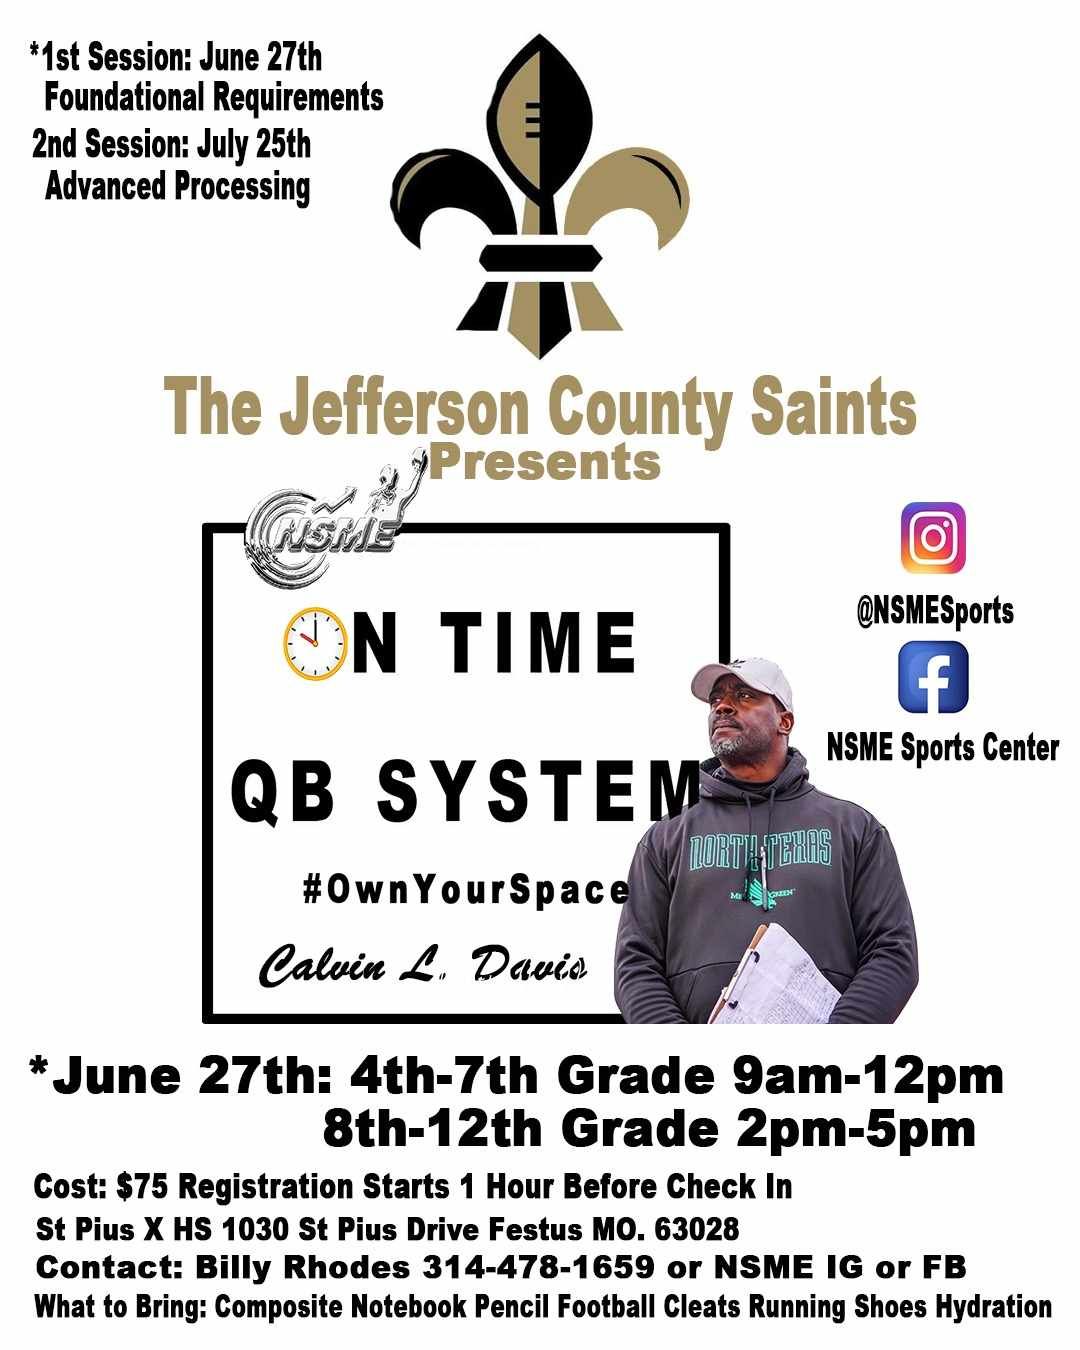 On Time QB System By Calvin L Davis 2 Session